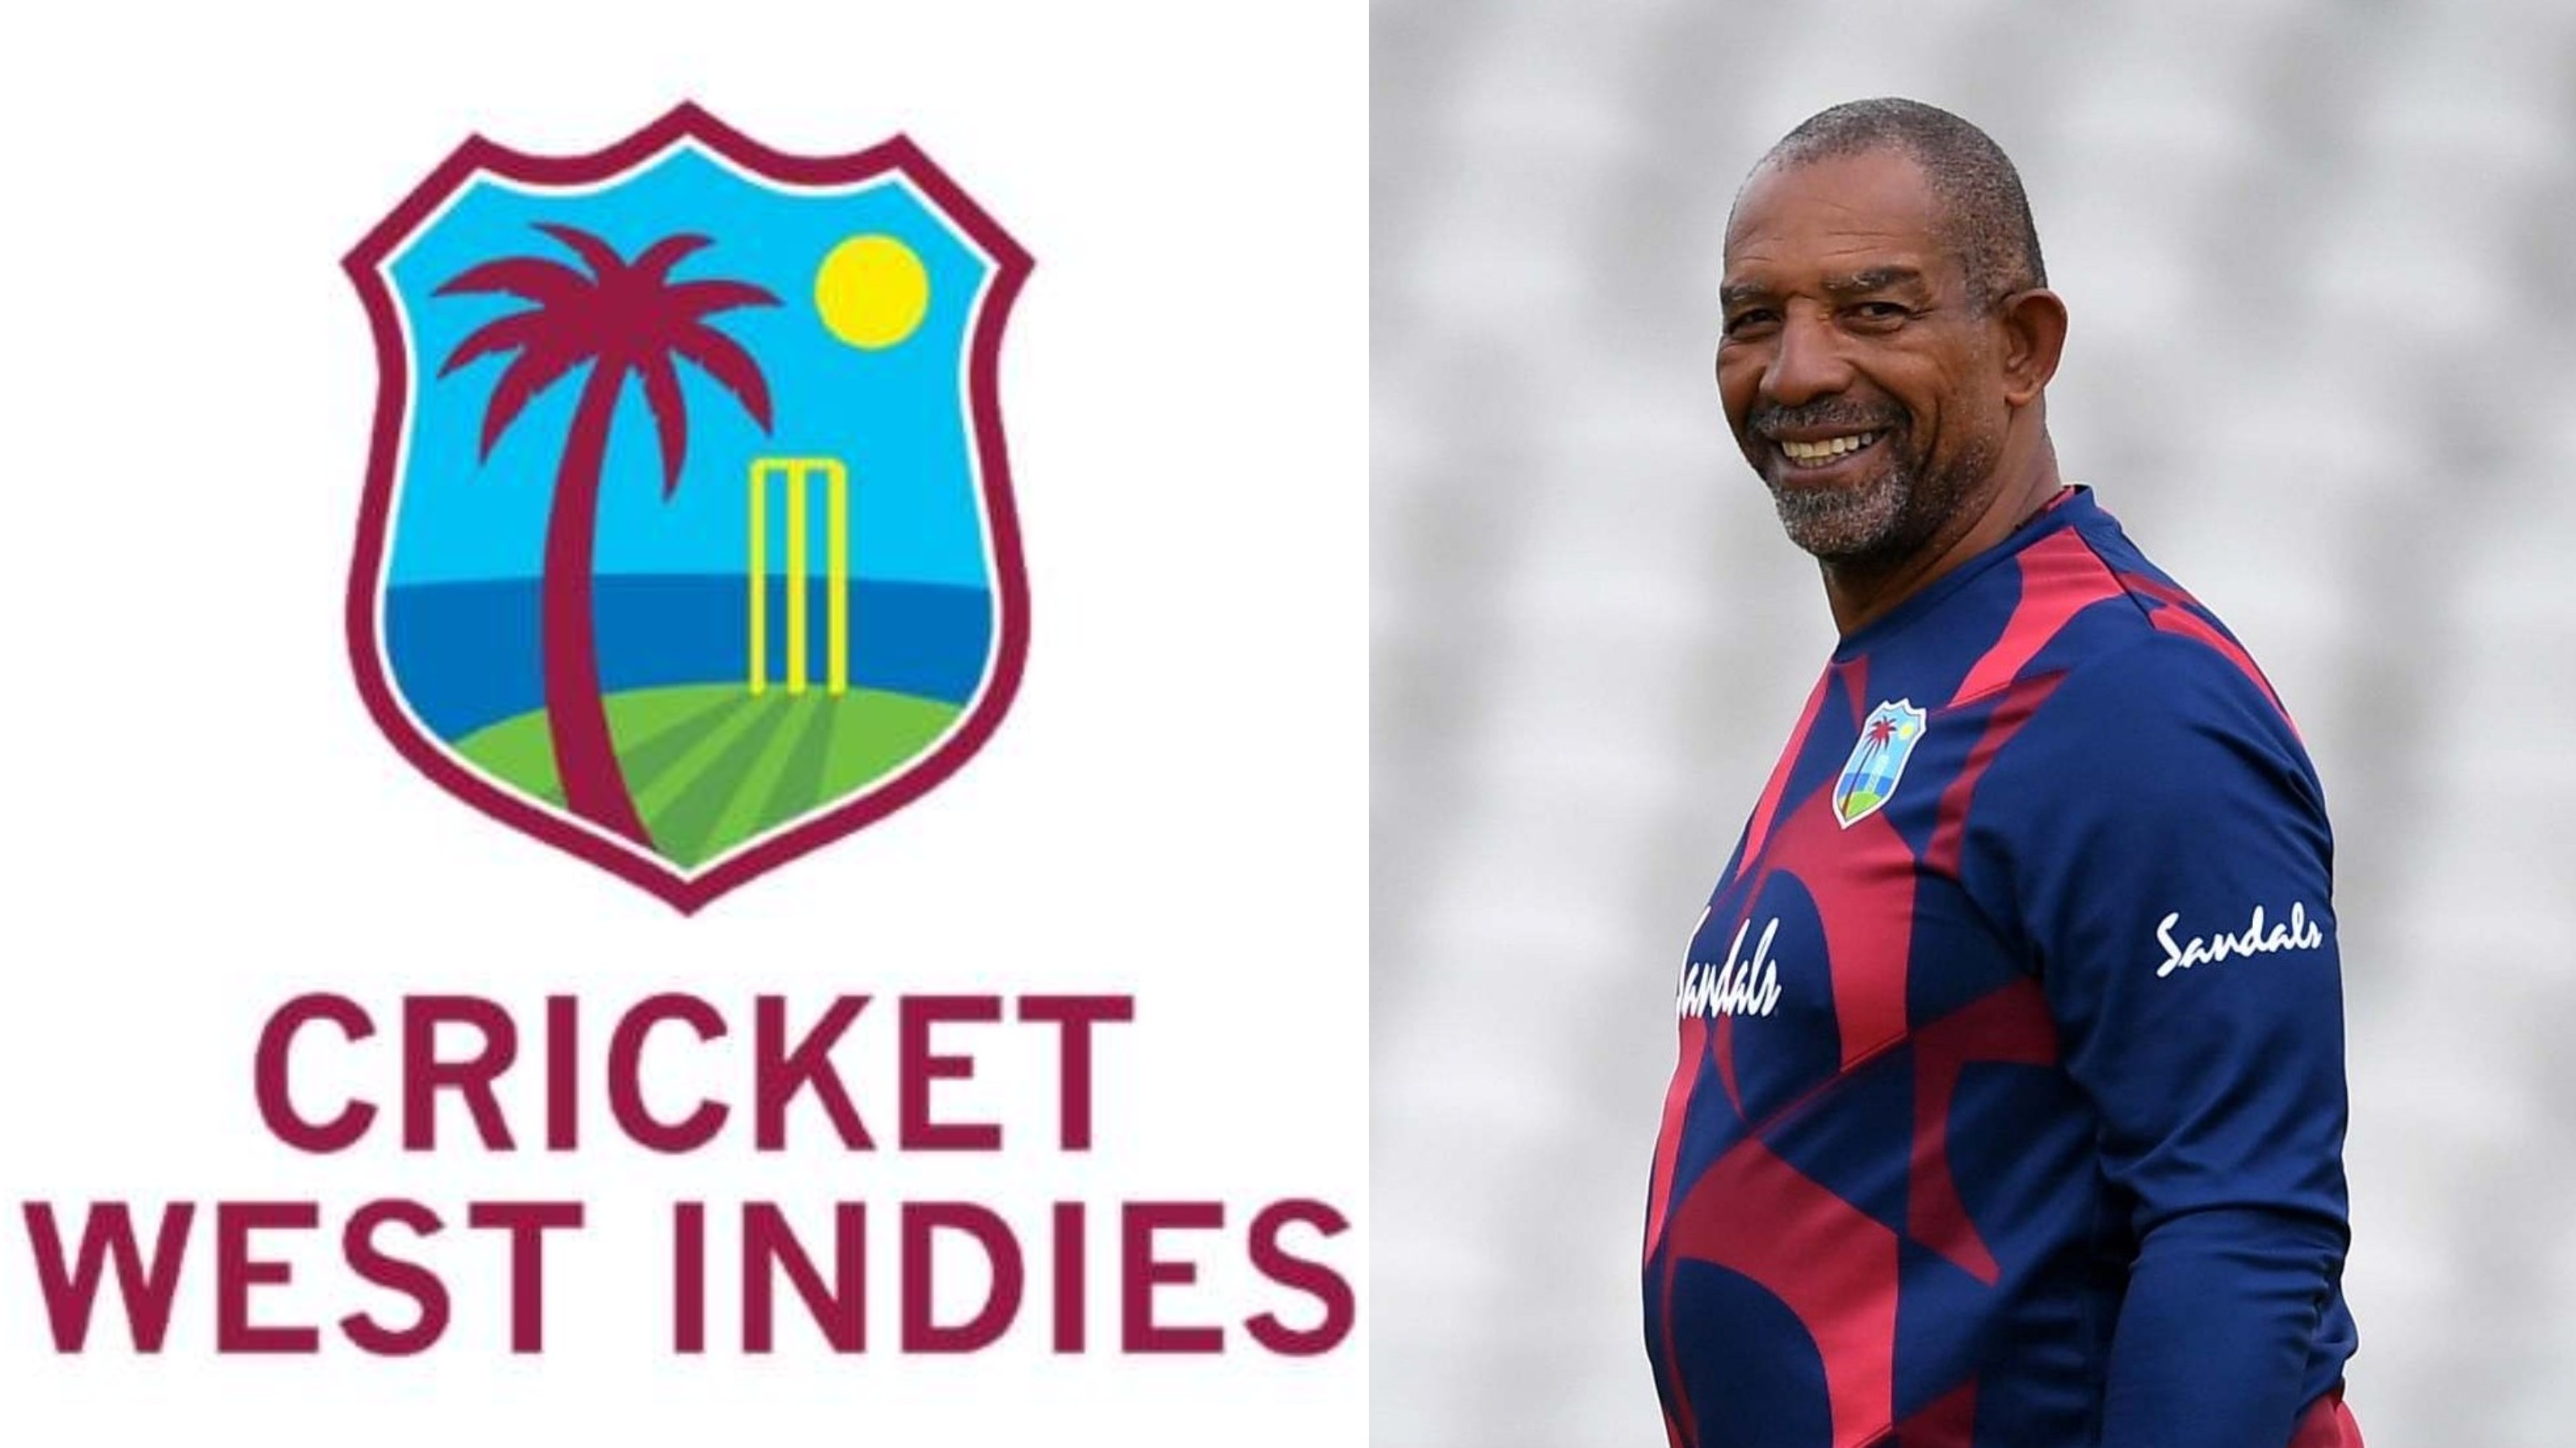 ENG v WI 2020: CWI confirms Phil Simmons' job is safe despite calls for his sacking 